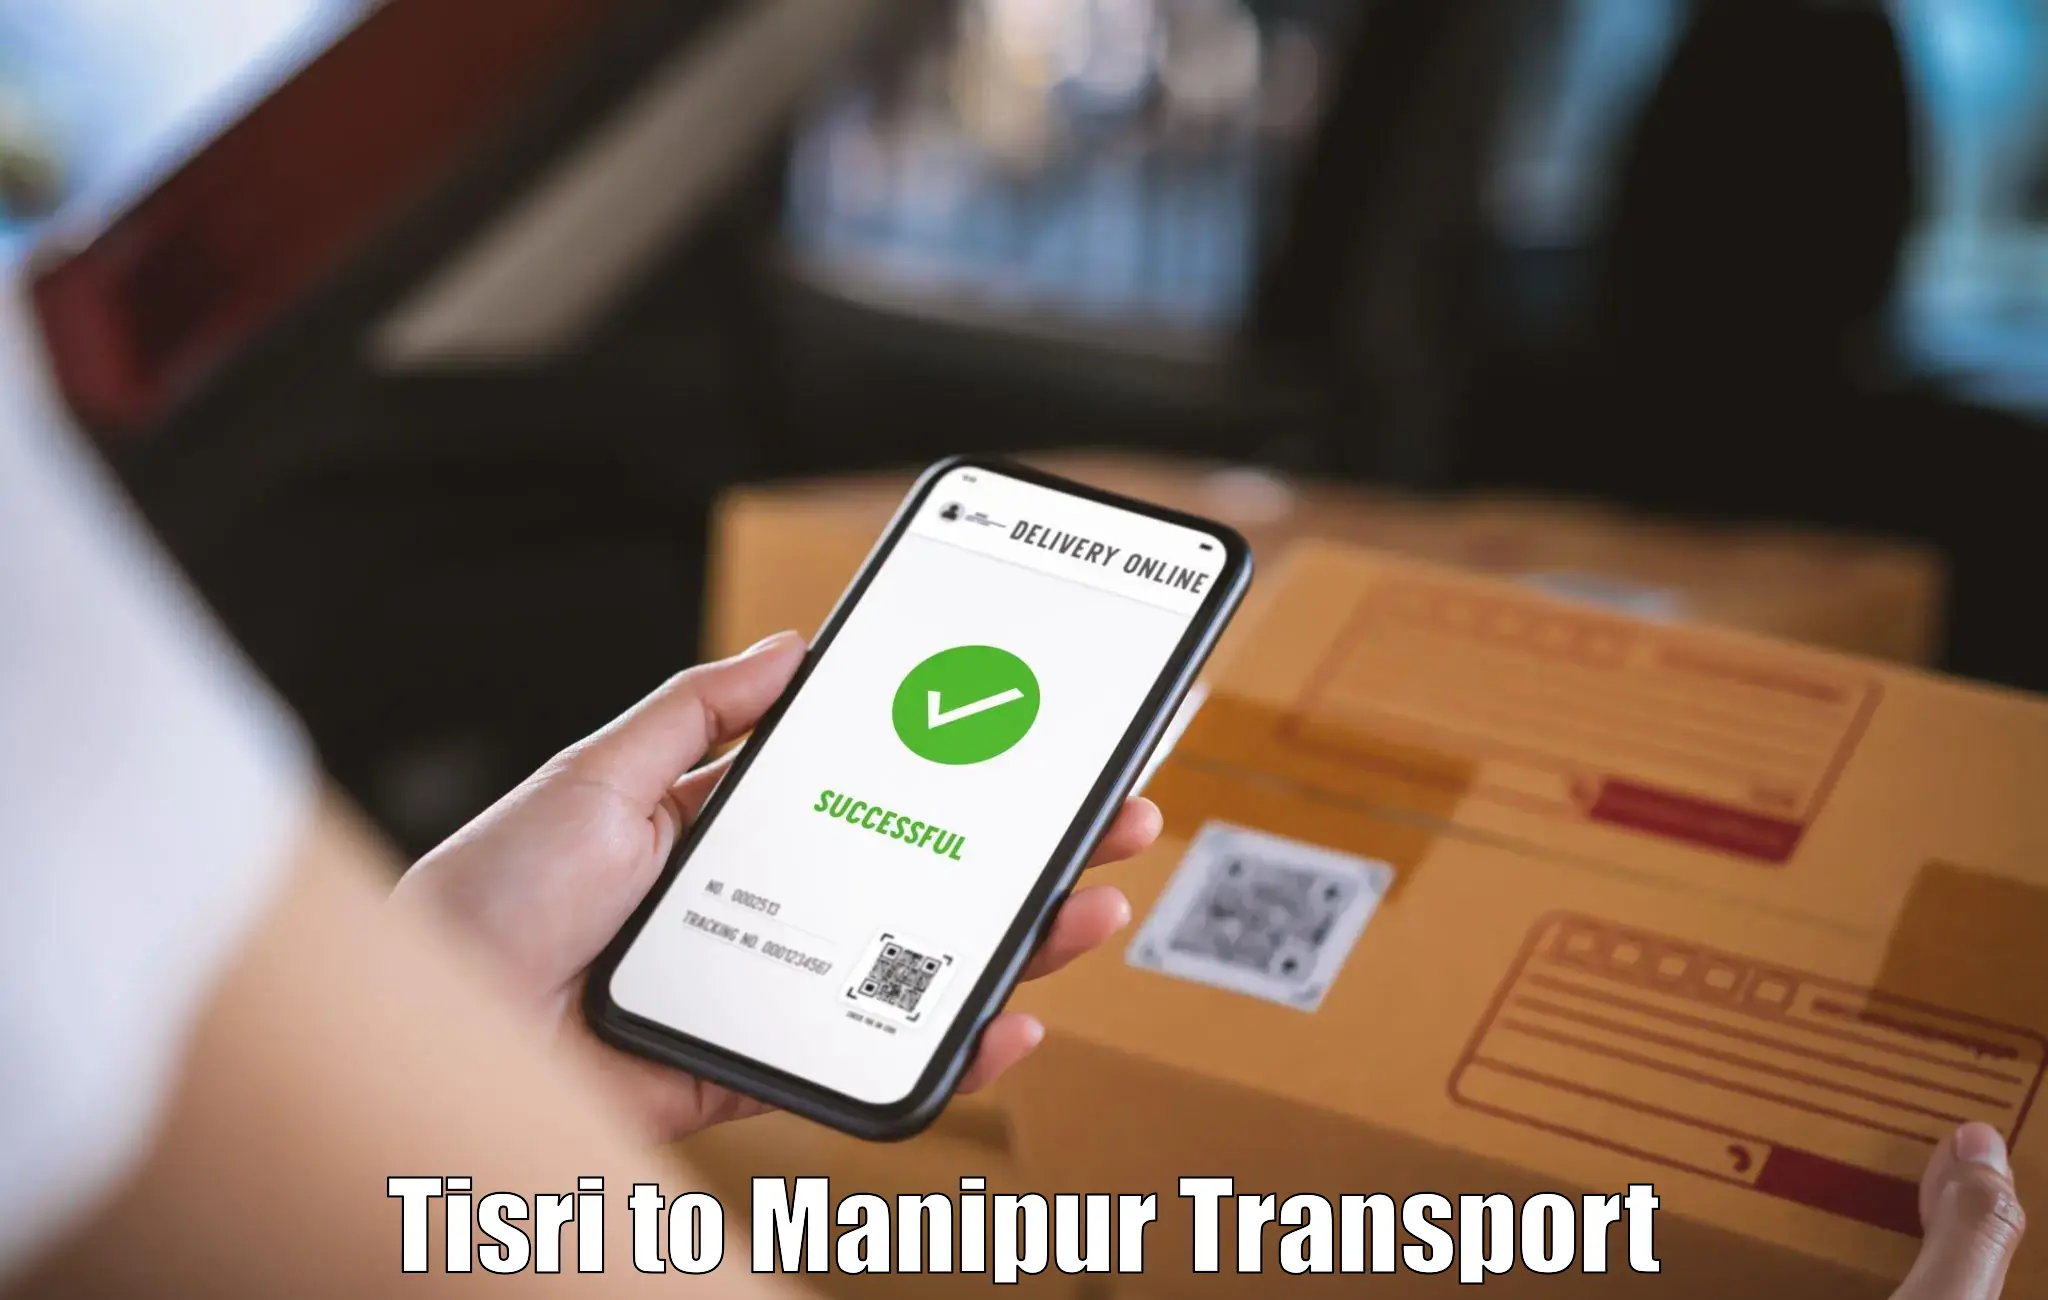 Air freight transport services Tisri to Manipur